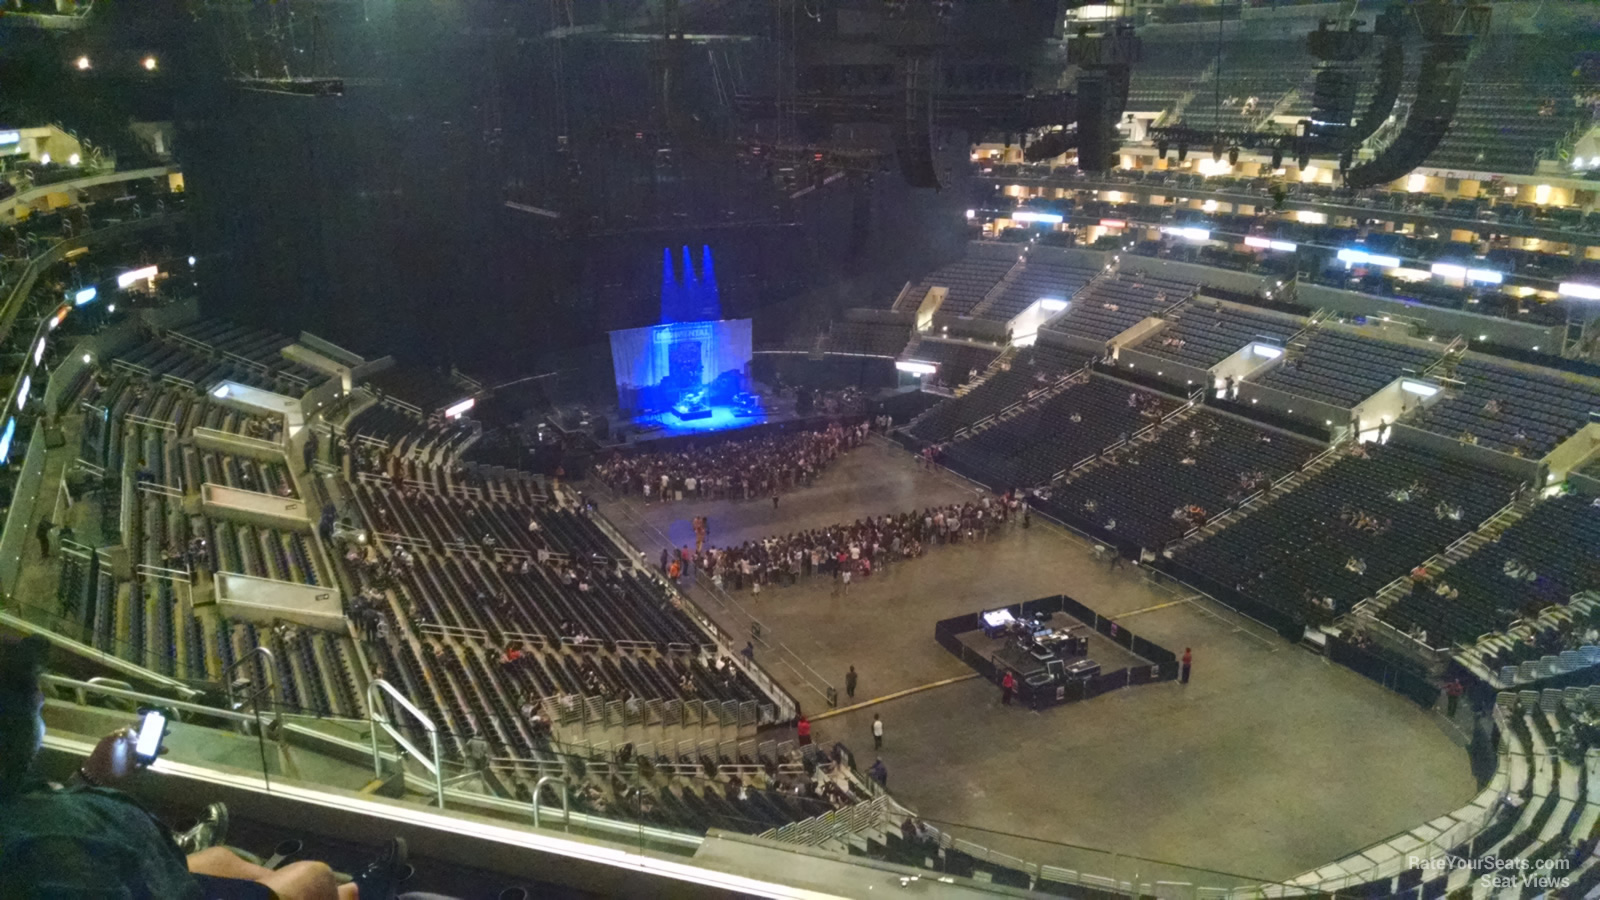 section 313, row 10 seat view  for concert - crypto.com arena